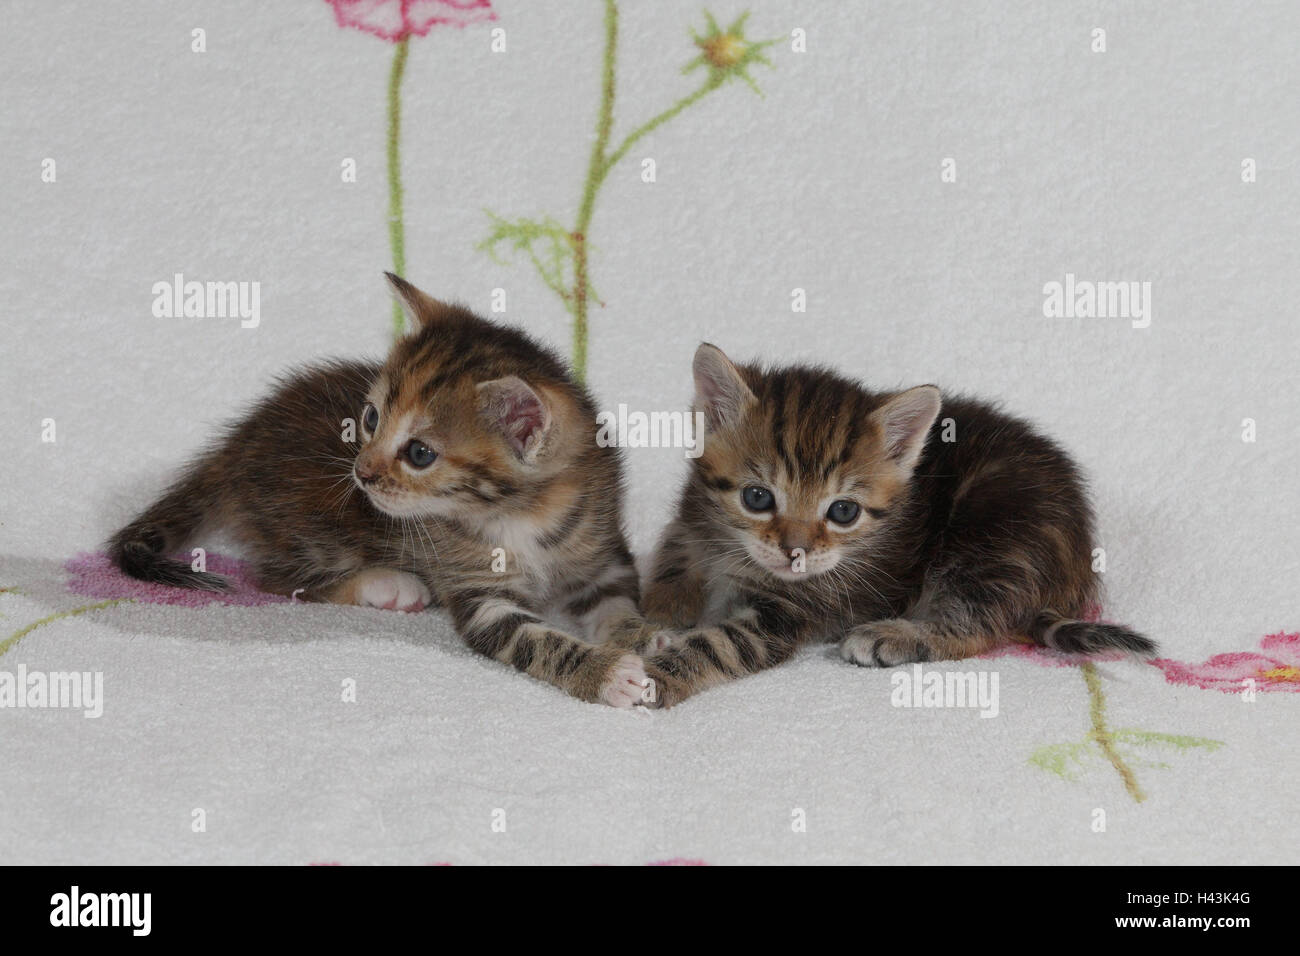 Cats, young, lie, together, bed, animals, mammals, pets, small cats, Felidae, domesticates, house cat, young animal, kitten, two, siblings, small, awkward, clumsy, sweetly, touch, striped, cohesion, love, suture, togetherness, young animals, animal babies, inside, Stock Photo